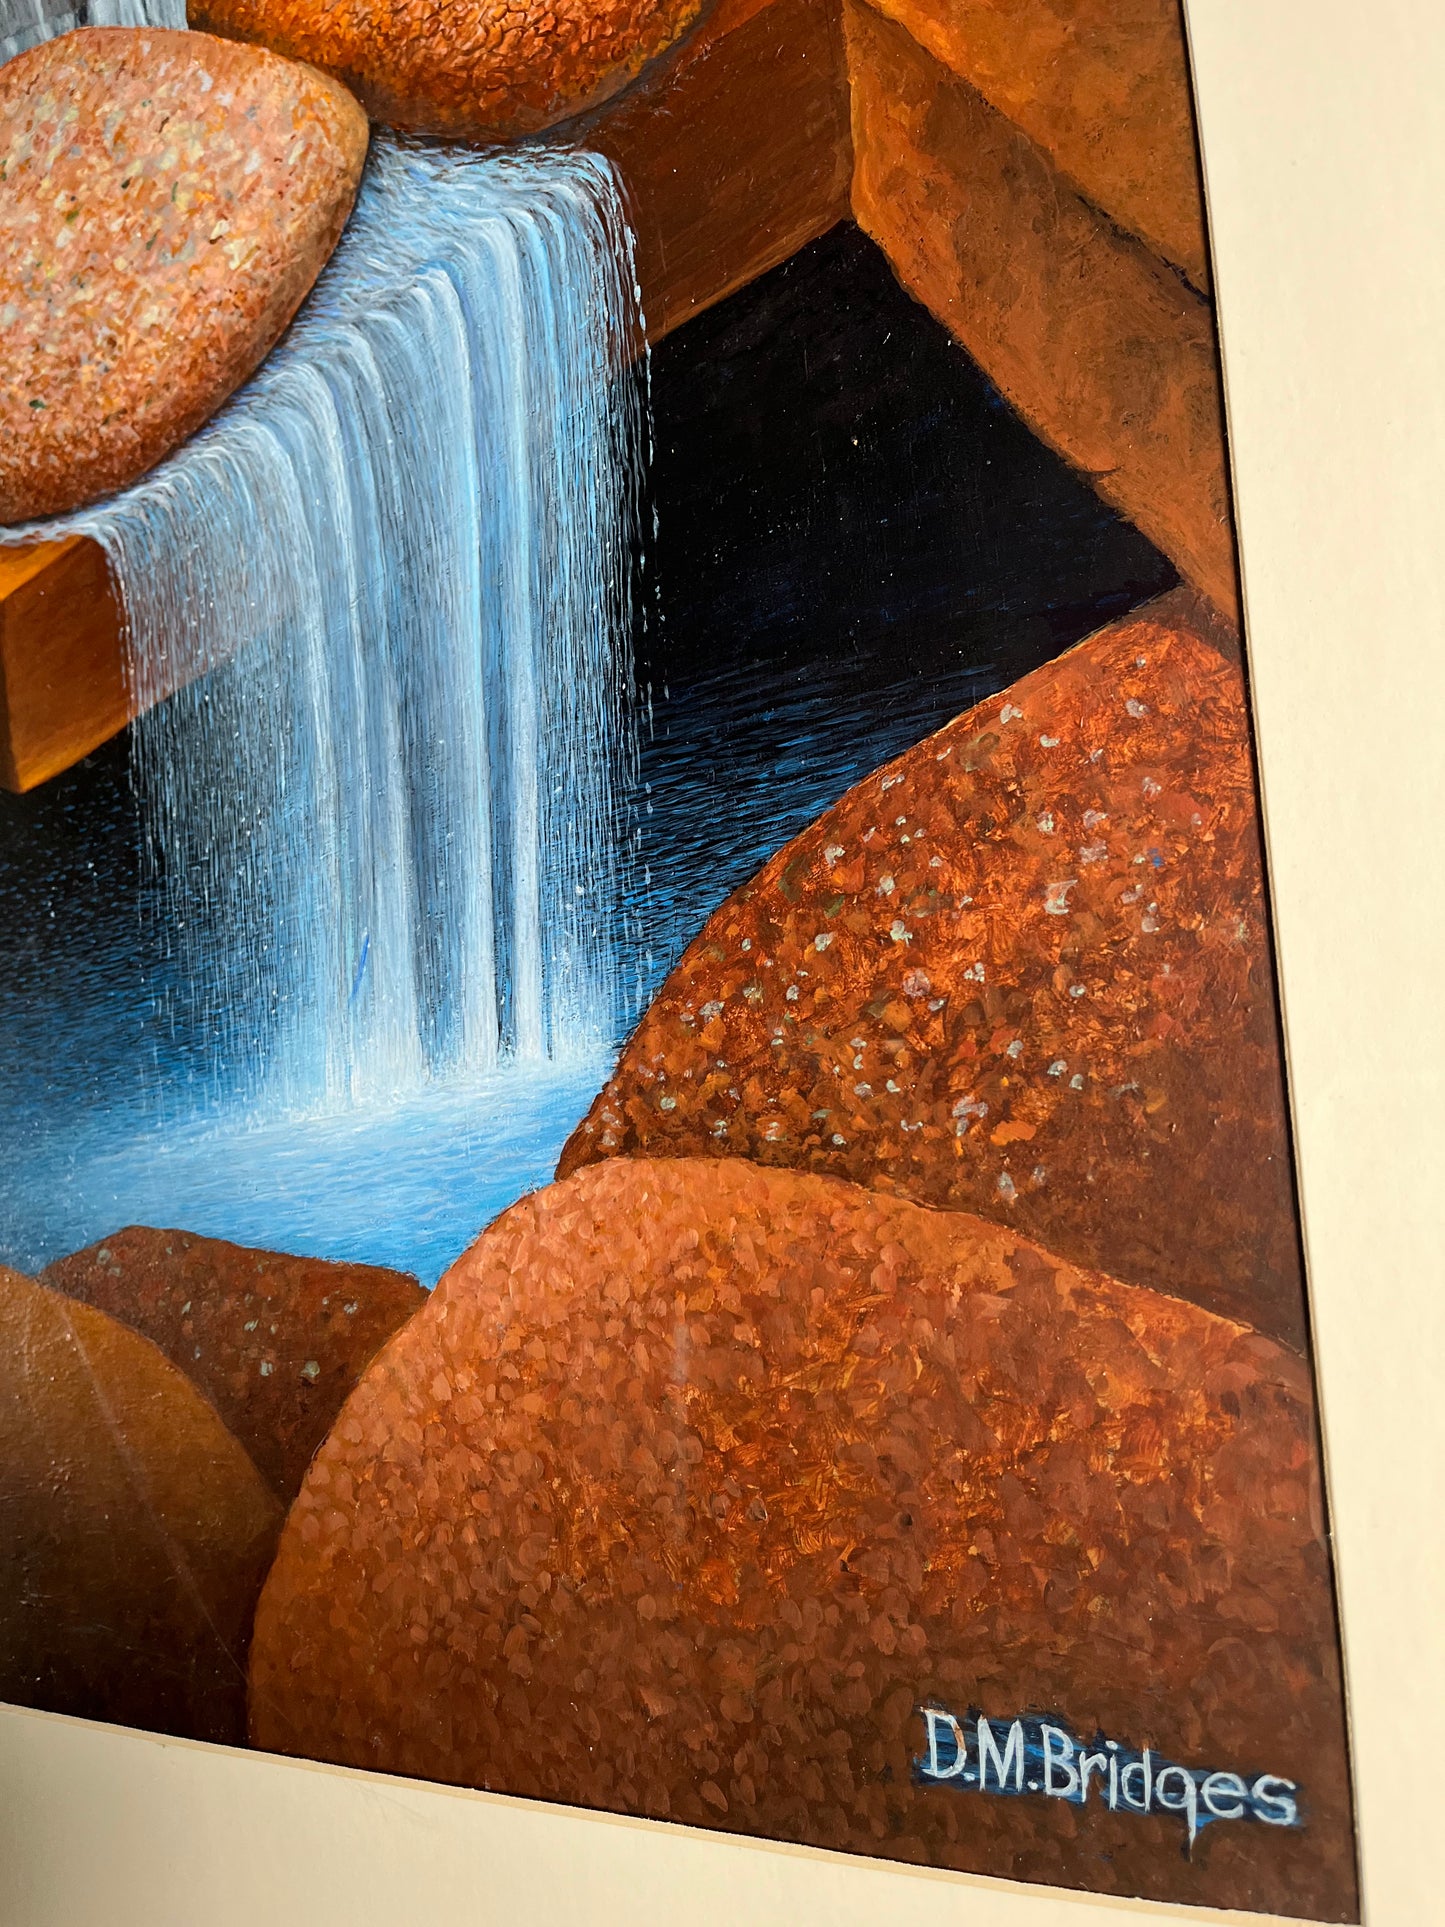 Limited Edition “Serenity” Acrylic Painting by David M. Bridges